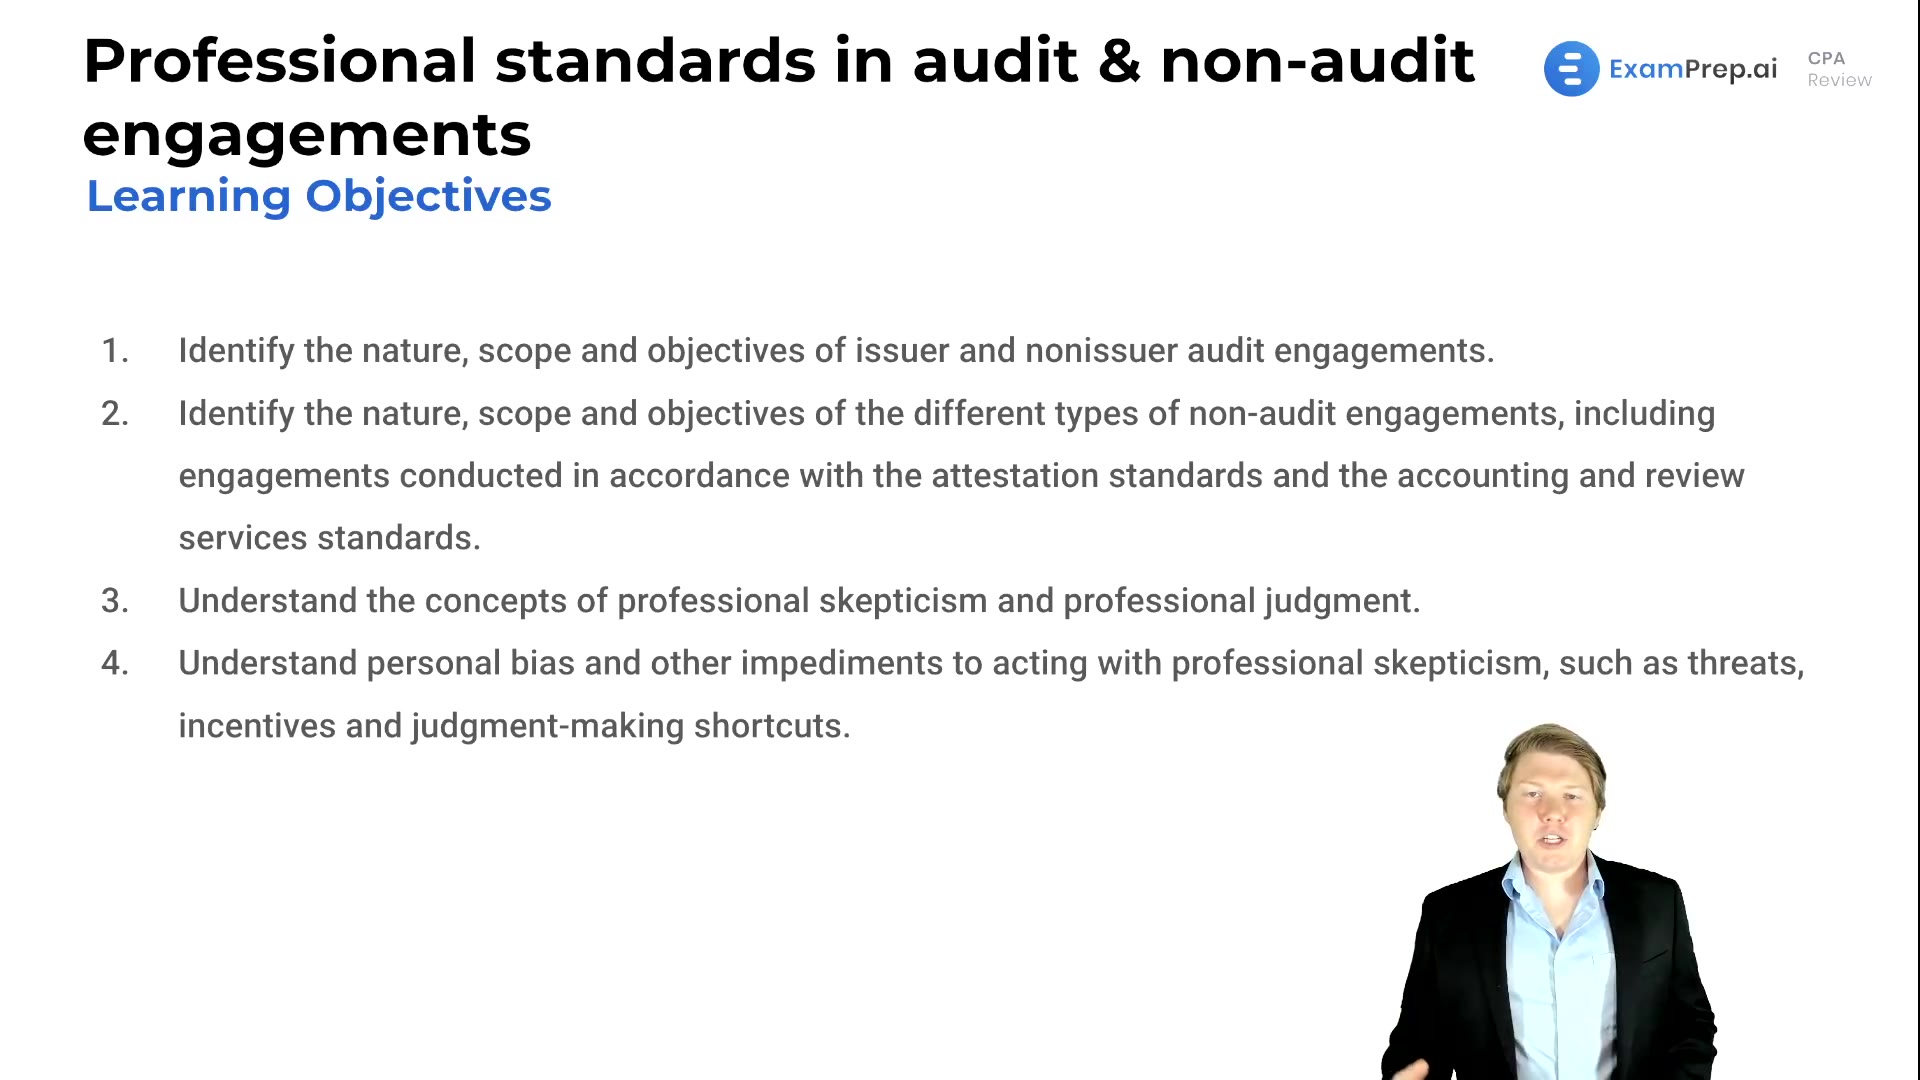 Professional Standards in Audit & Non-audit Engagements Objectives lesson thumbnail